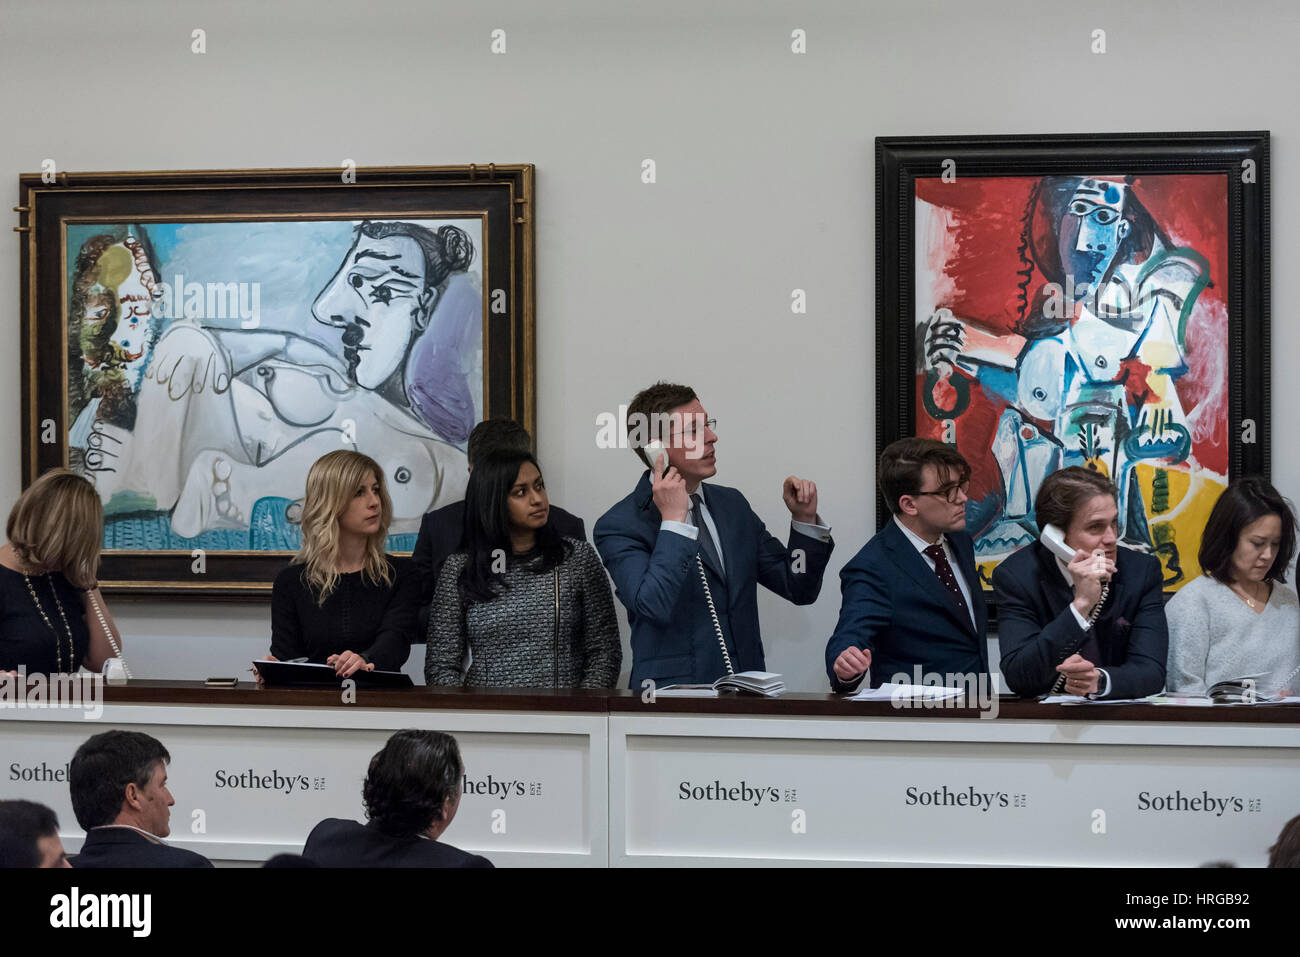 London, UK.  1 March 2017. Sotheby's staff, bidding on behalf of telephone clients, stand in front of (L to R) 'Femme Nue Assise' by Pablo Picasso which sold for a hammer price of GBP12m (est. GBP9.5-12.5m) and 'Femme Assise Dans Un Fauteuil Sur Fond Blanc' by Pablo Picasso which sold for a hammer price of GBP10.6m (est GBP6.5-9.5m), at the evening sale of Impressionist and Surrealist Art at Sotheby's in New Bond Street.  Credit: Stephen Chung / Alamy Live News Stock Photo